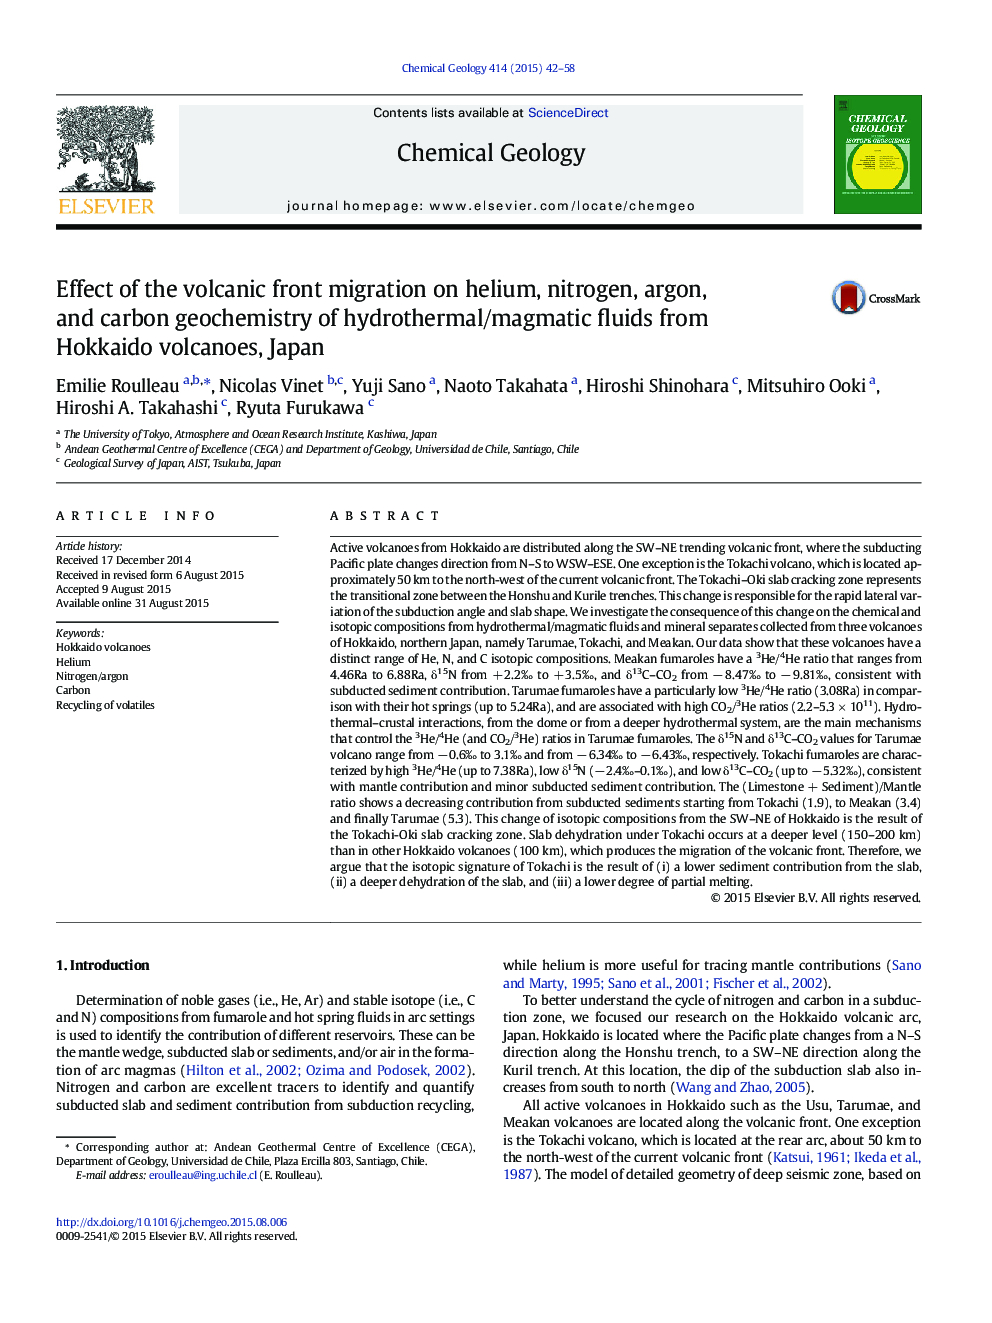 Effect of the volcanic front migration on helium, nitrogen, argon, and carbon geochemistry of hydrothermal/magmatic fluids from Hokkaido volcanoes, Japan